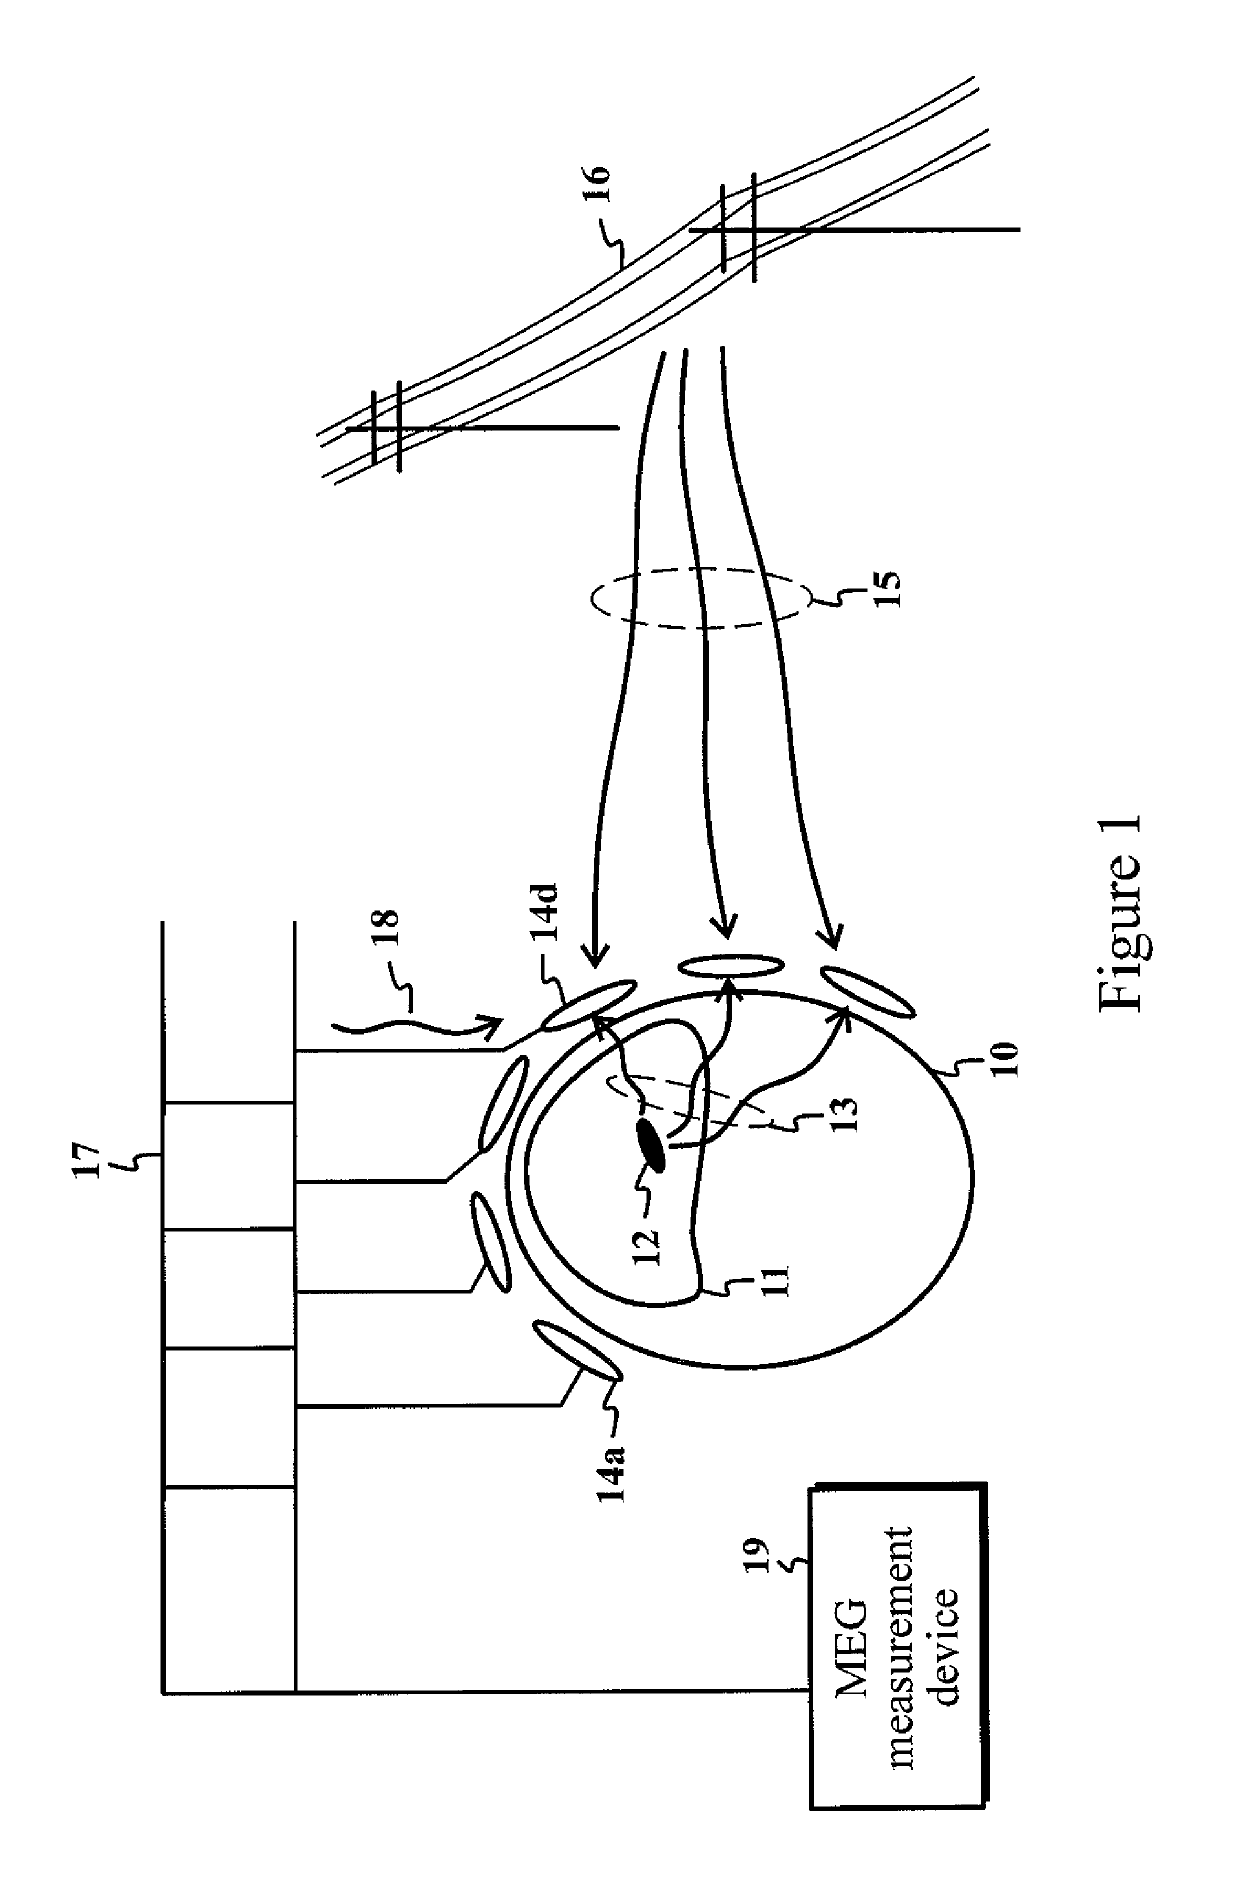 Method and device for recognizing and removing undesired artifacts in multichannel magnetic field or electric potential measurements